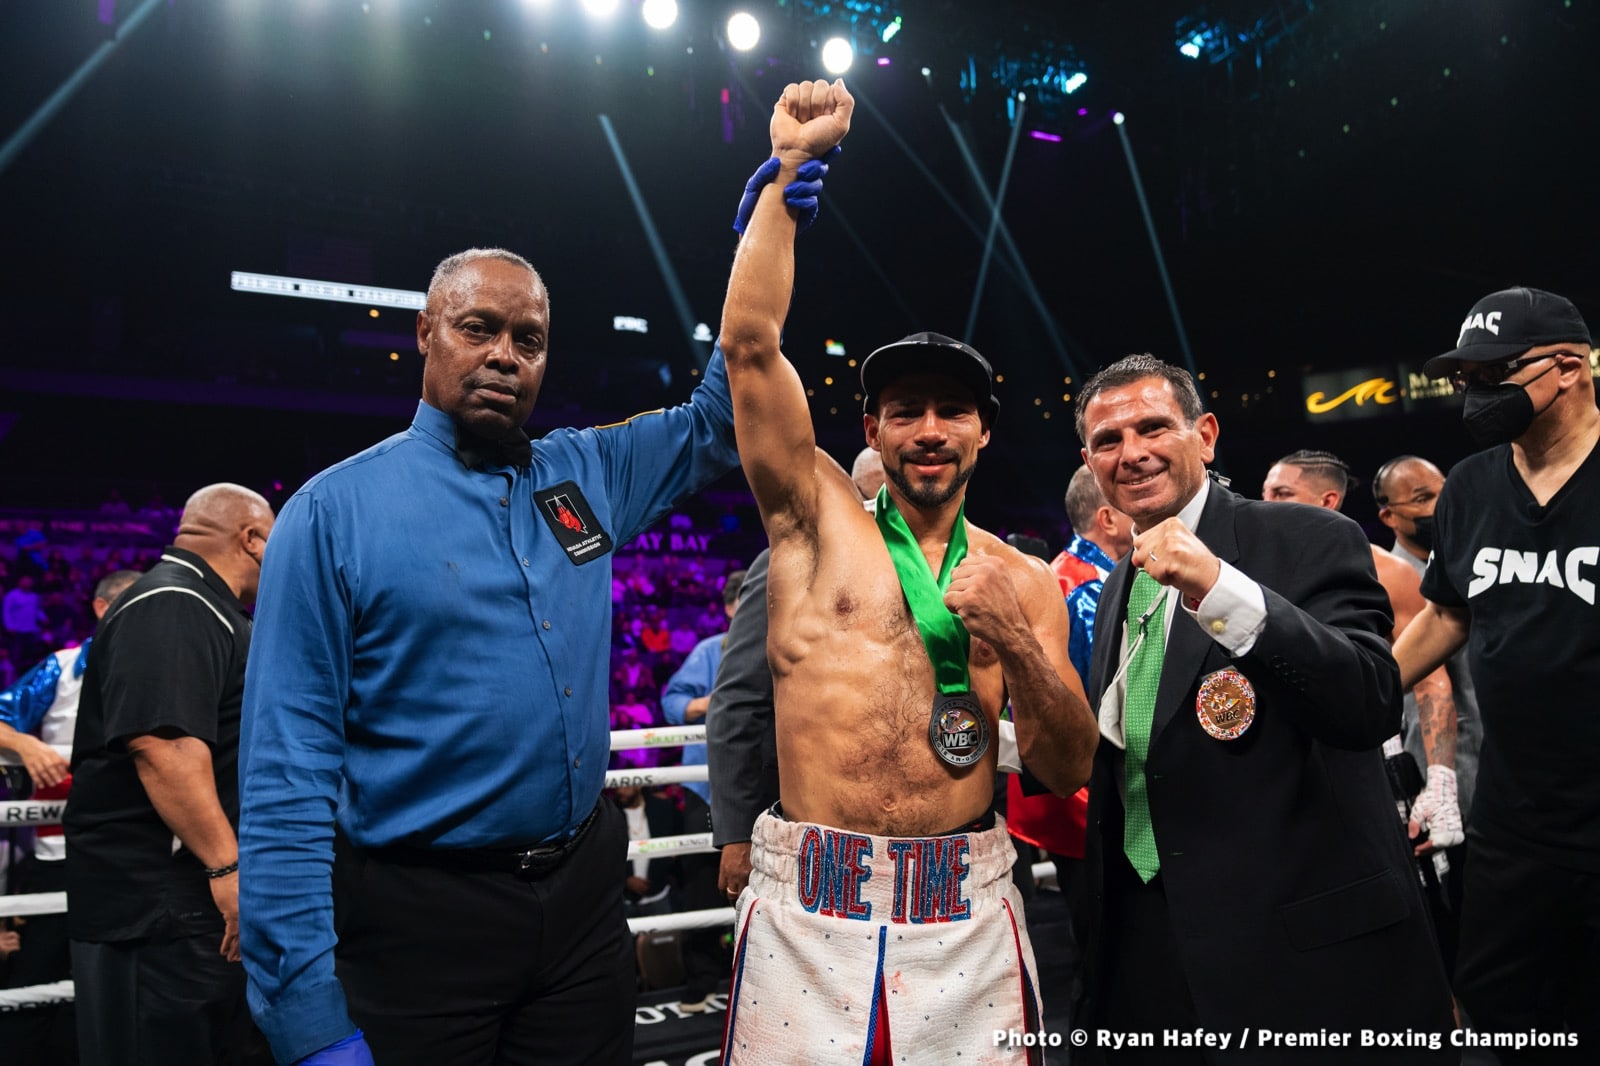 Image: Keith Thurman becoming a gatekeeper says Shawn Porter